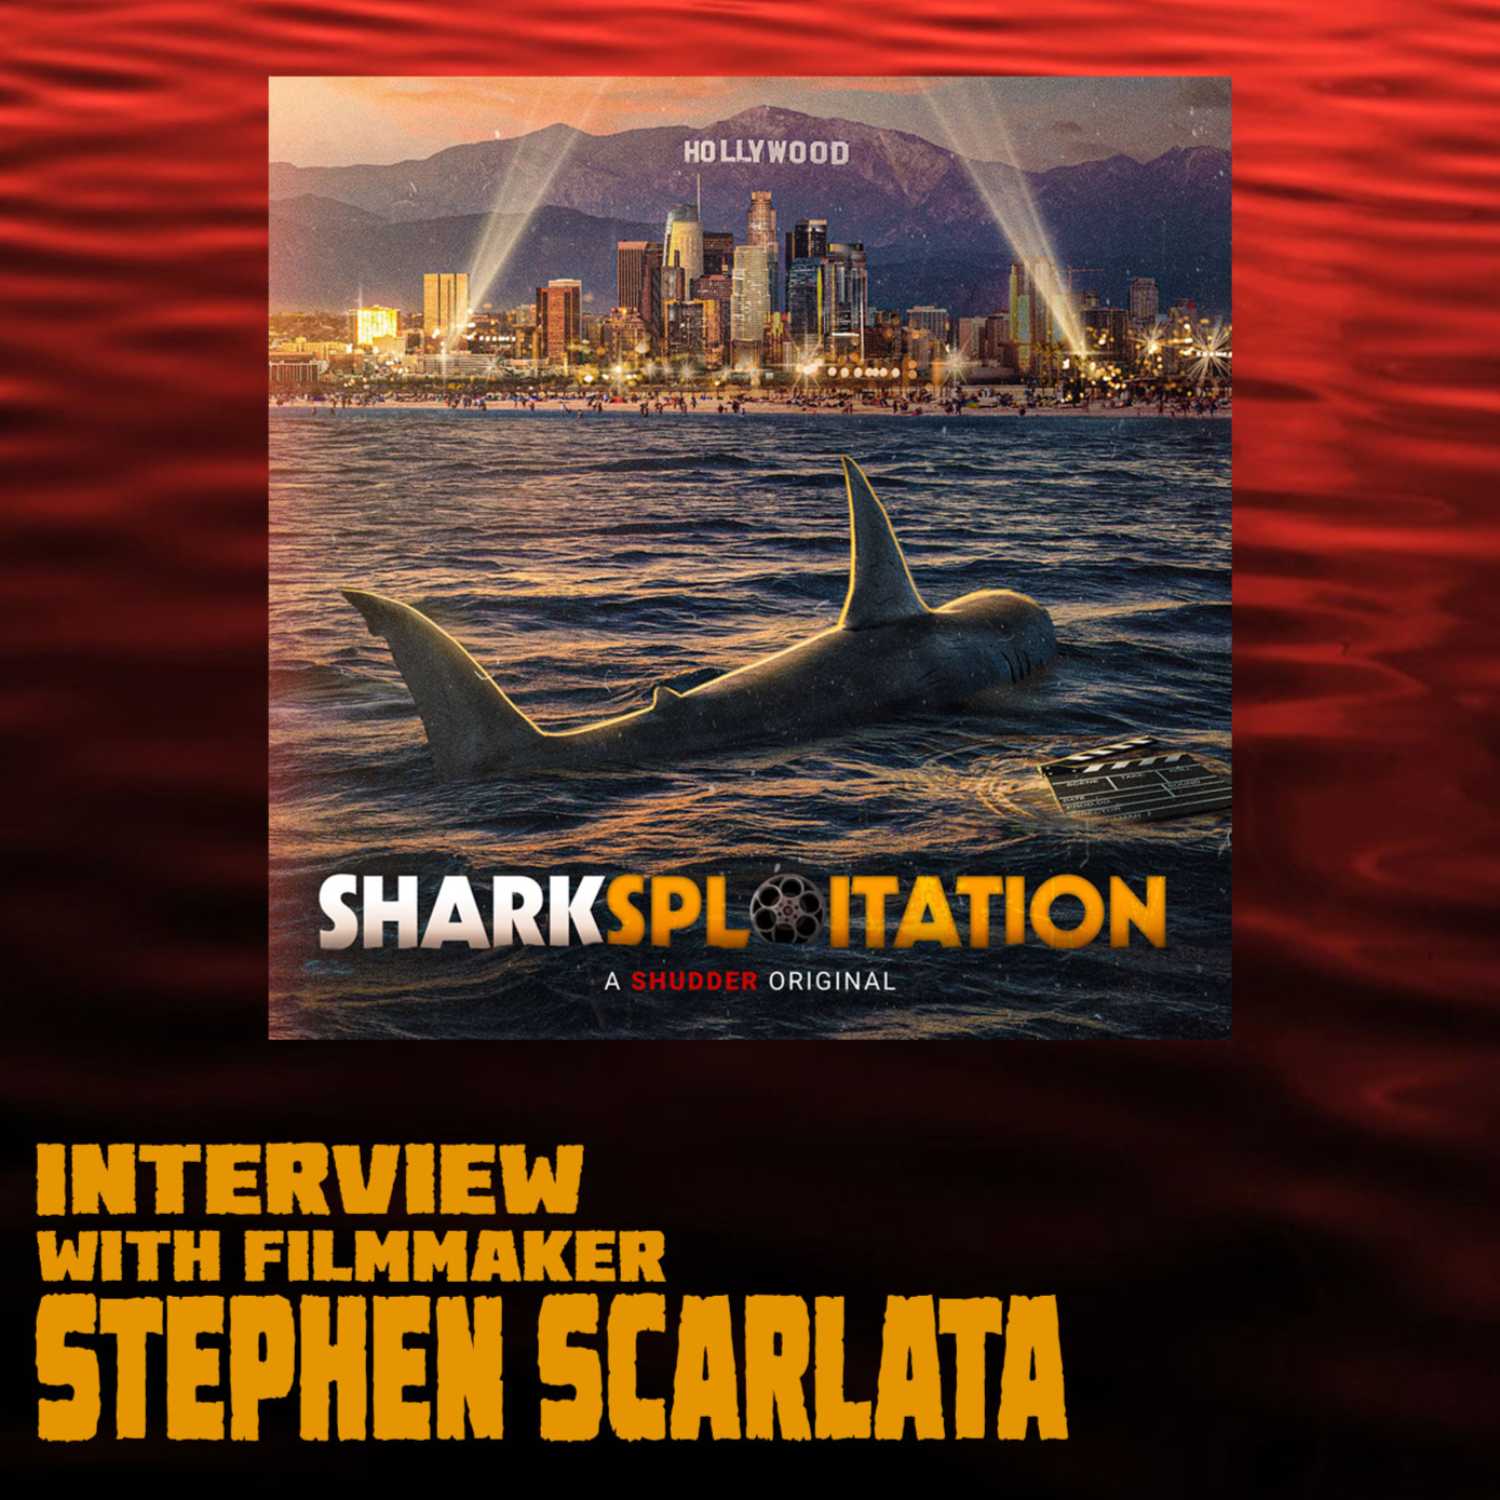 Blood In the Water! Sharksploitation Interview with Stephen Scarlata